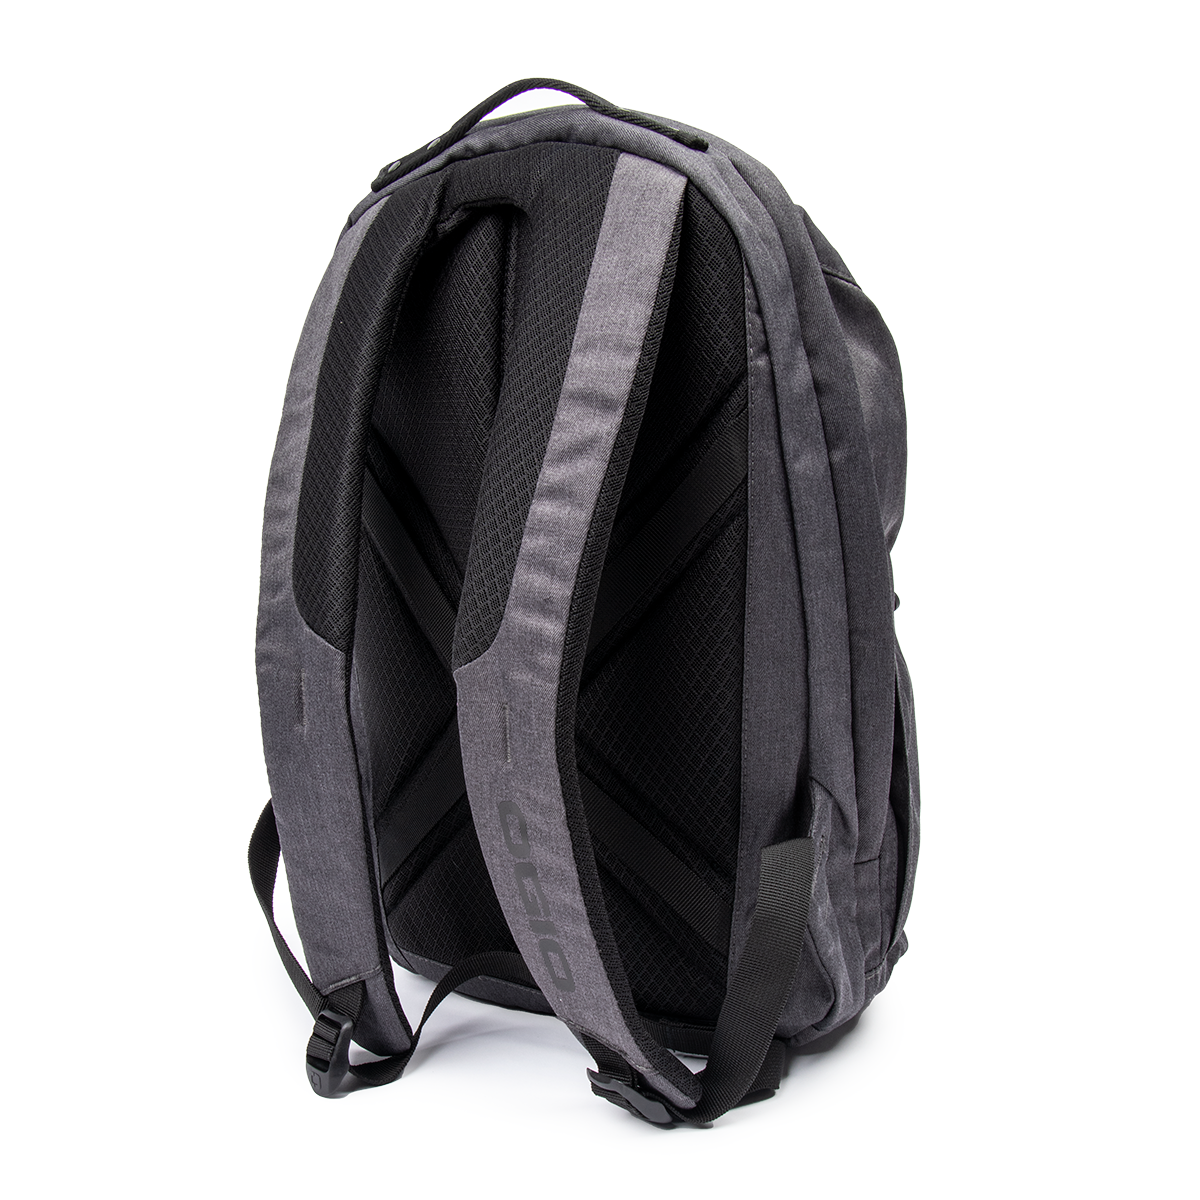 Ogio Downtown Backpack